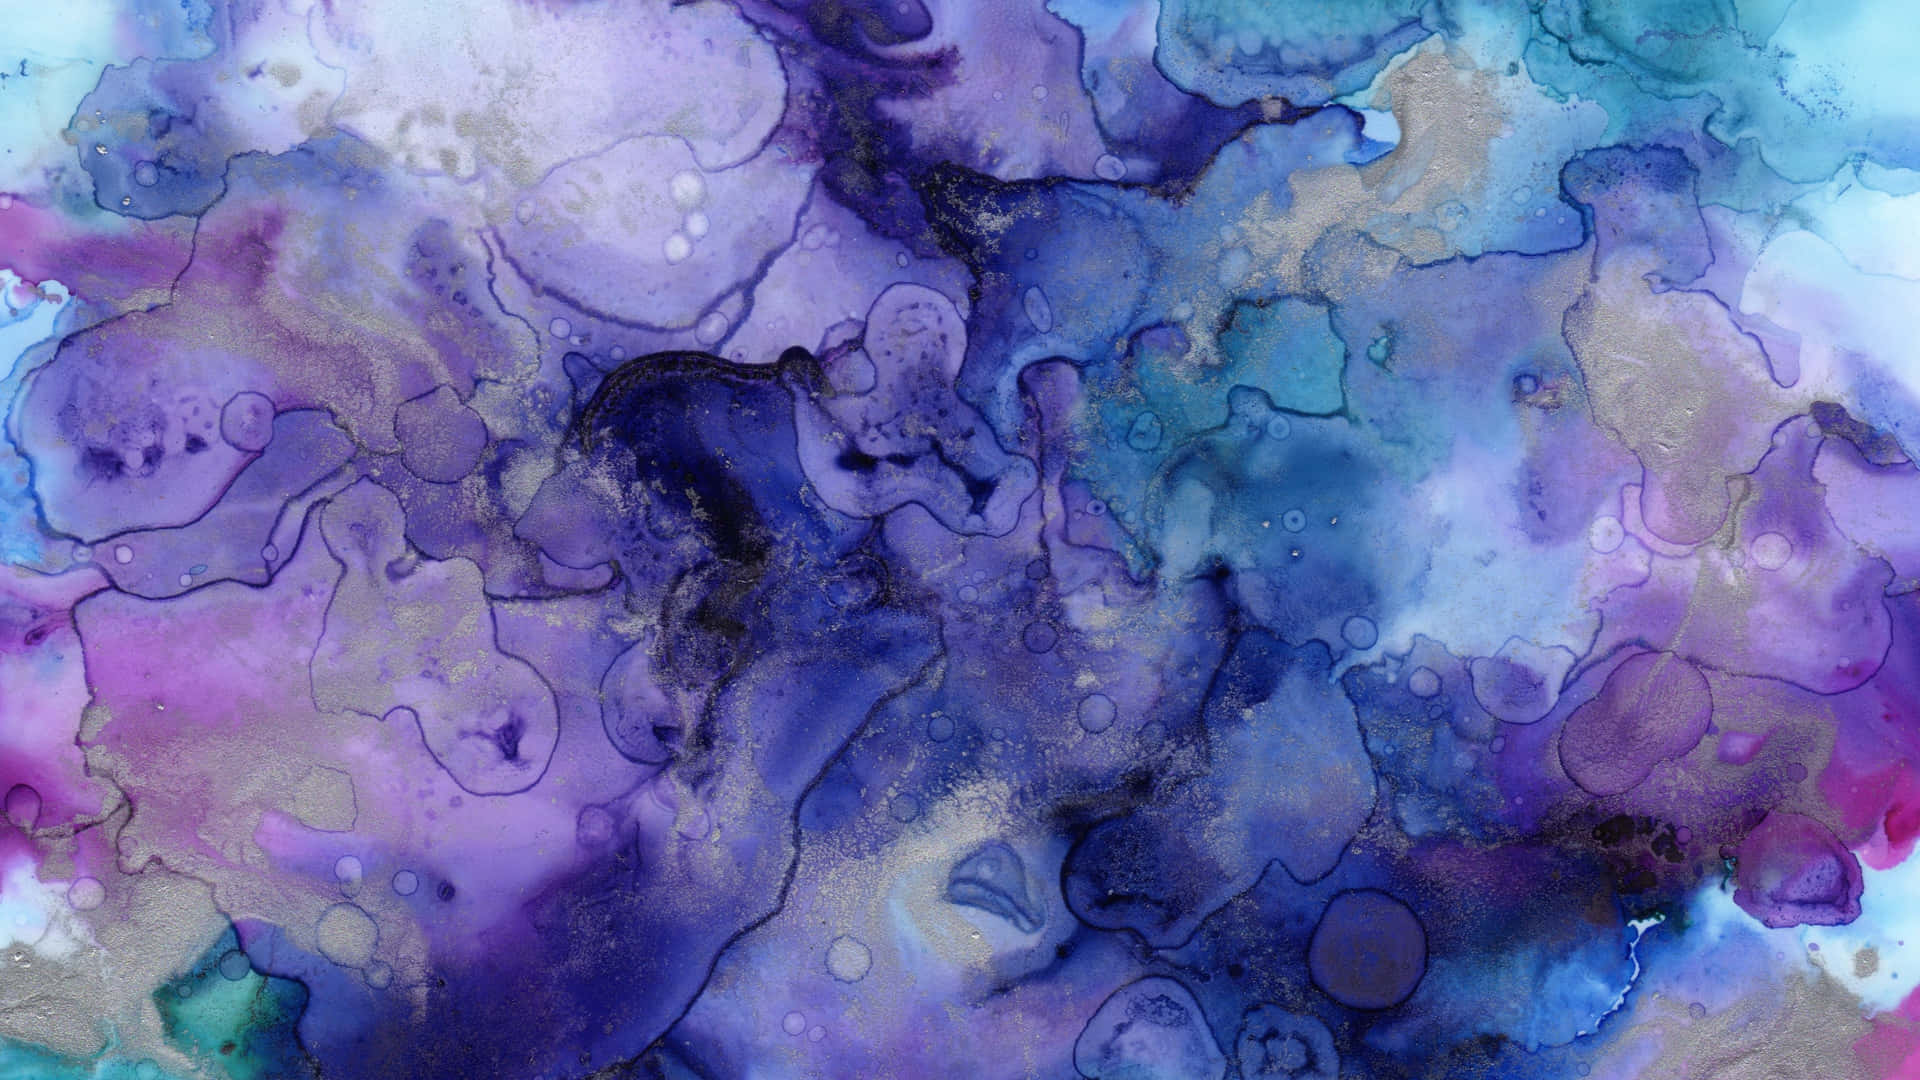 100+] High Resolution Watercolor Backgrounds